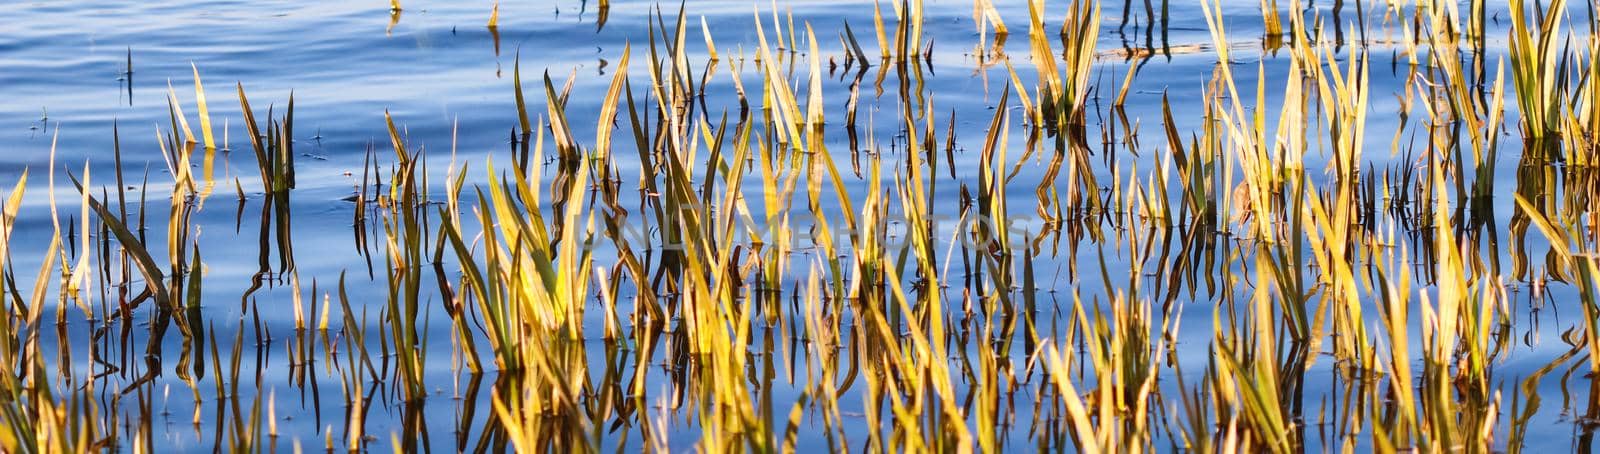 Reeds in the blue water of a lake at sunset by Olayola